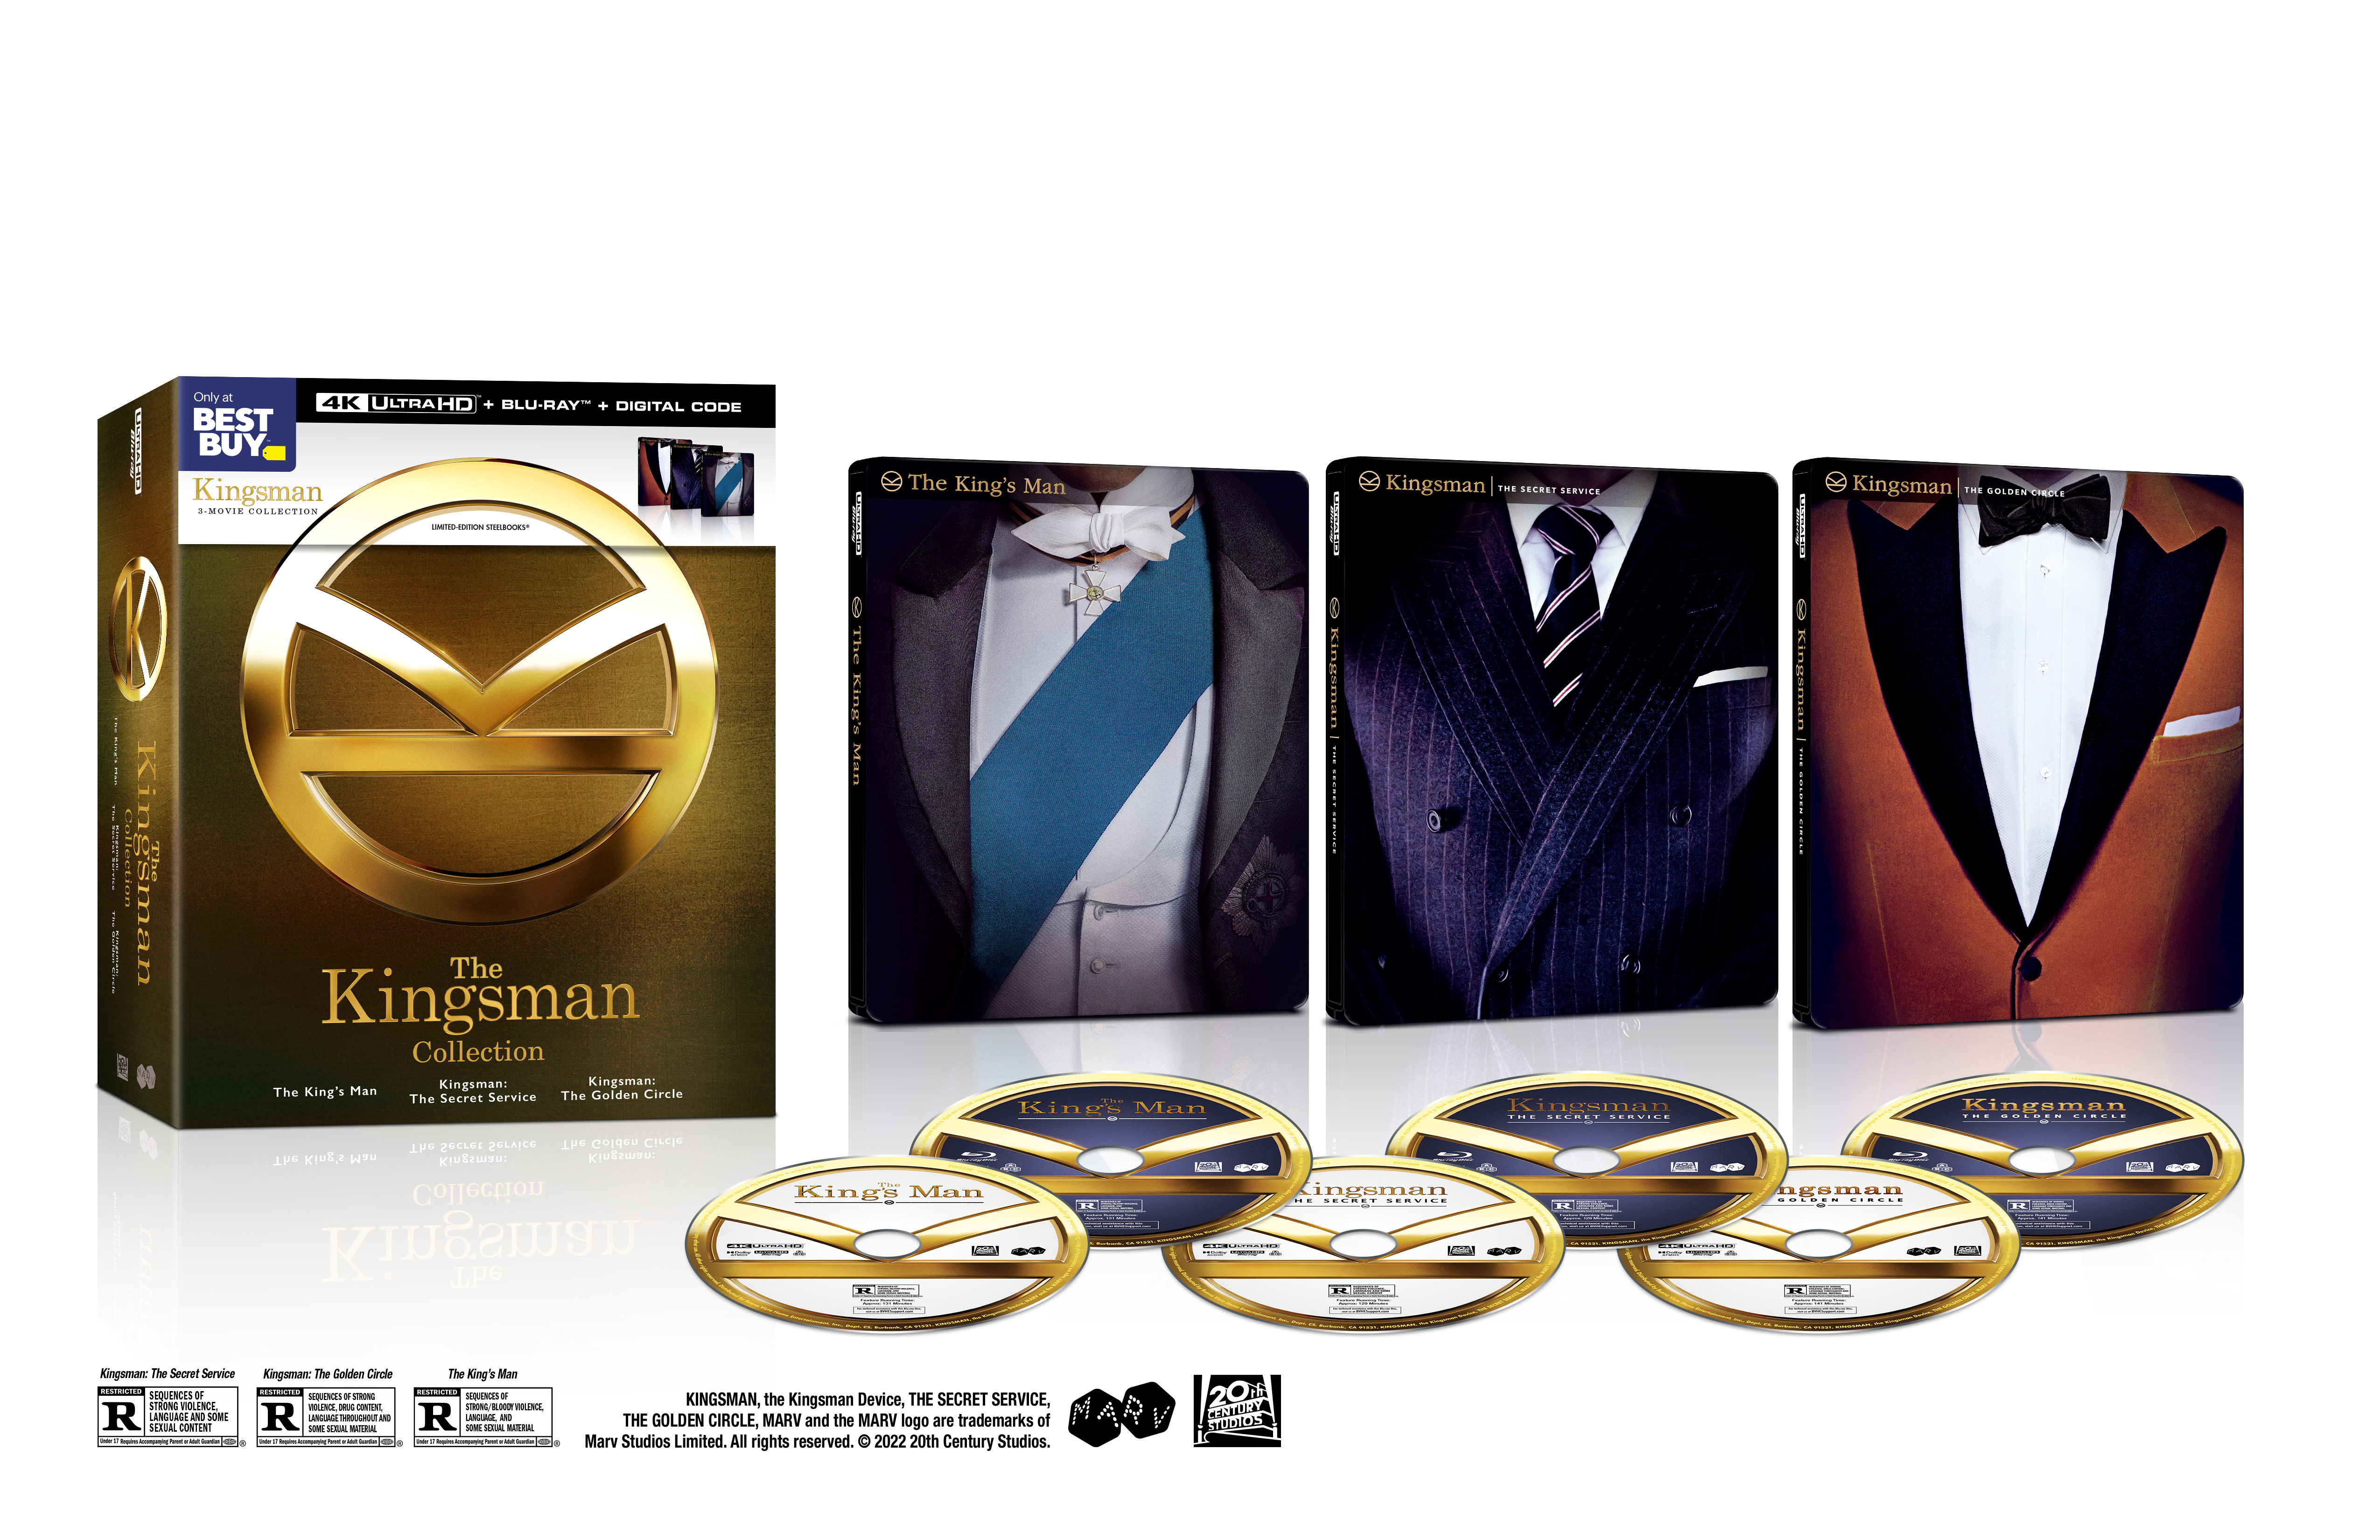 The King's Man DVD Collection